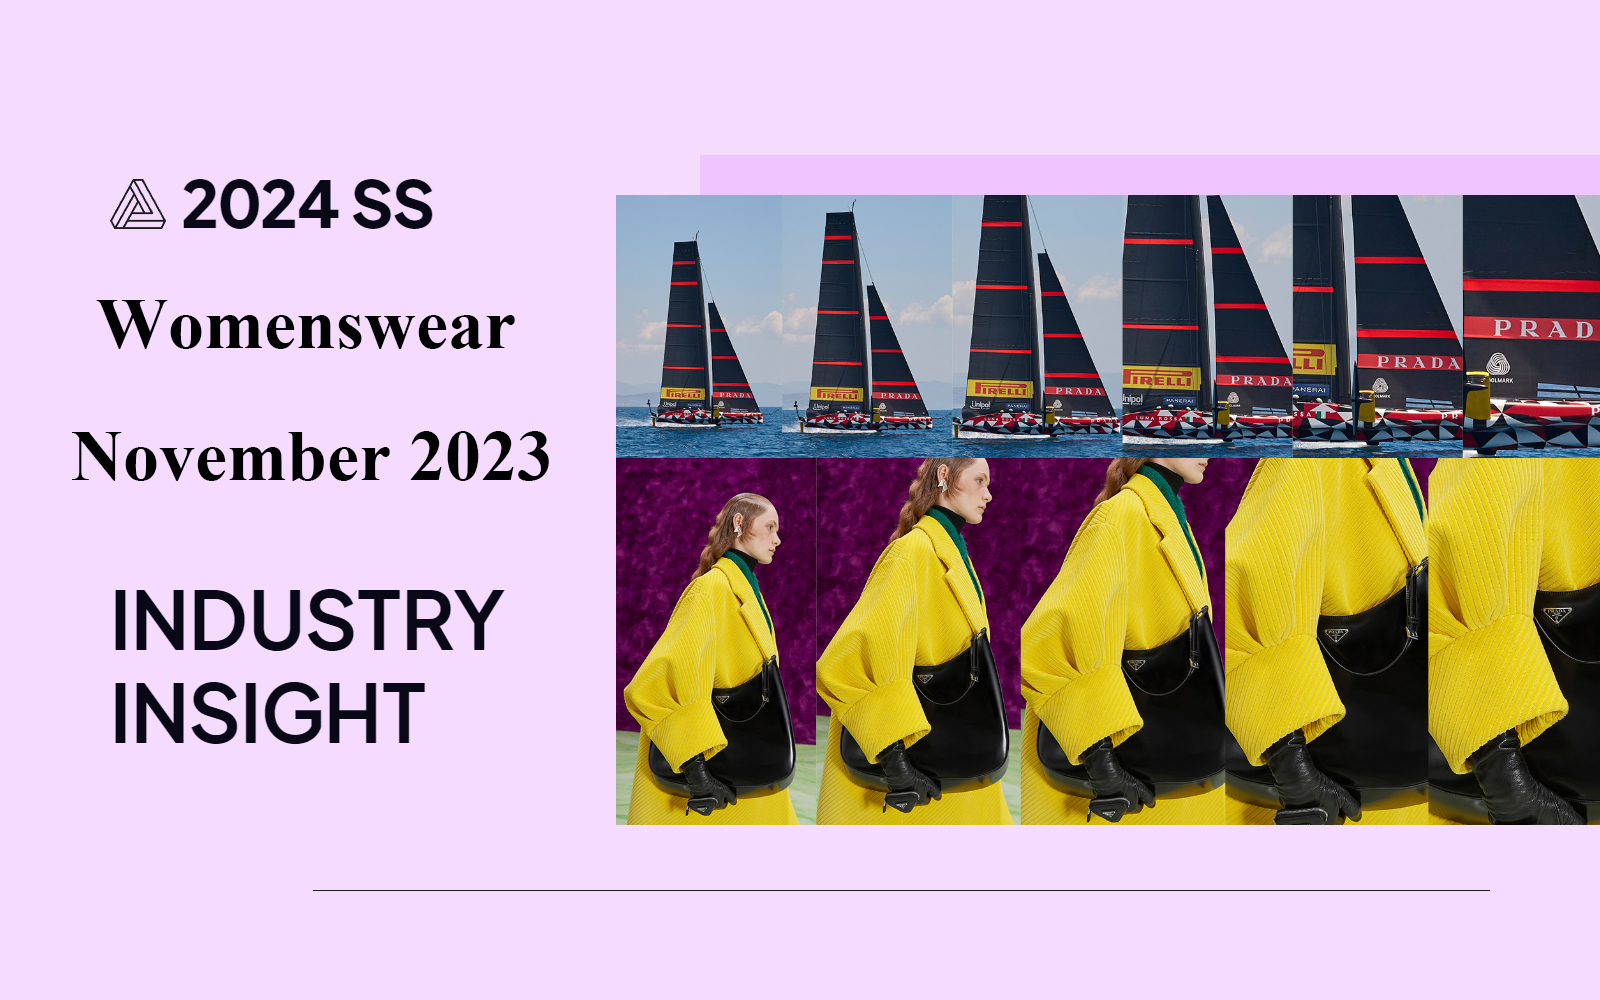 November 2023 -- The Industry Insight of Womenswear